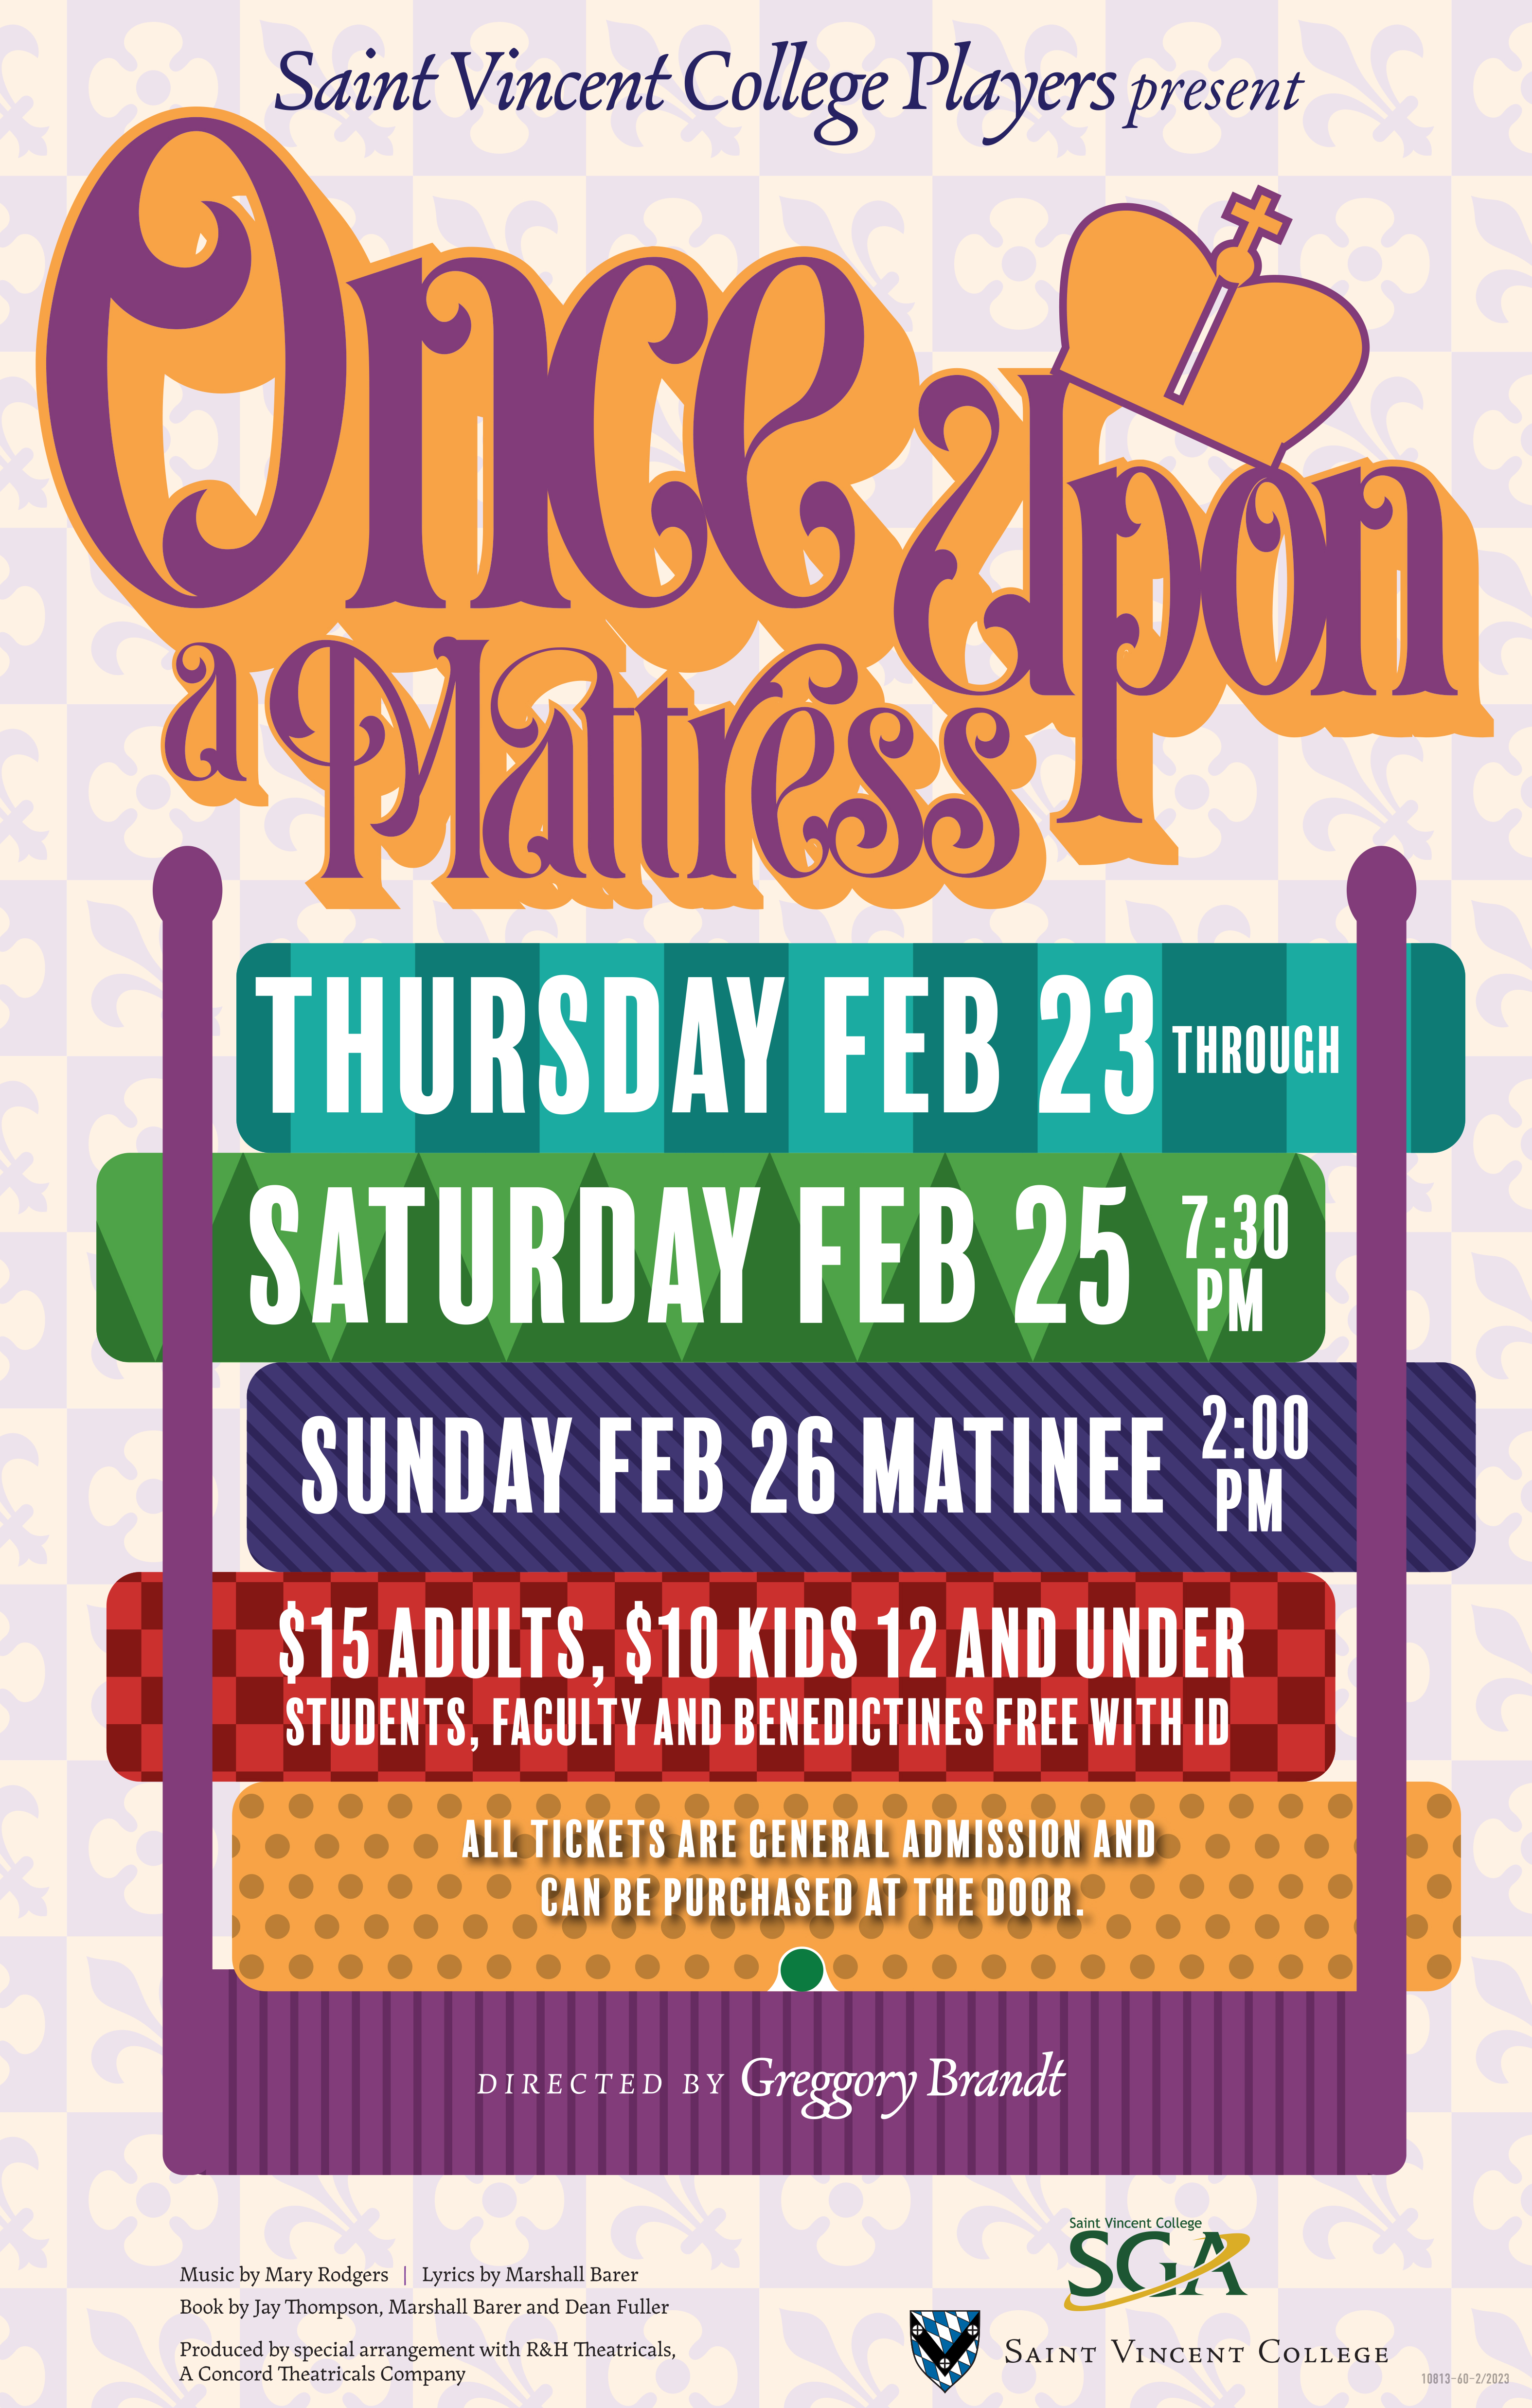 SVC Players to present “Once Upon a Mattress” Feb. 23-26